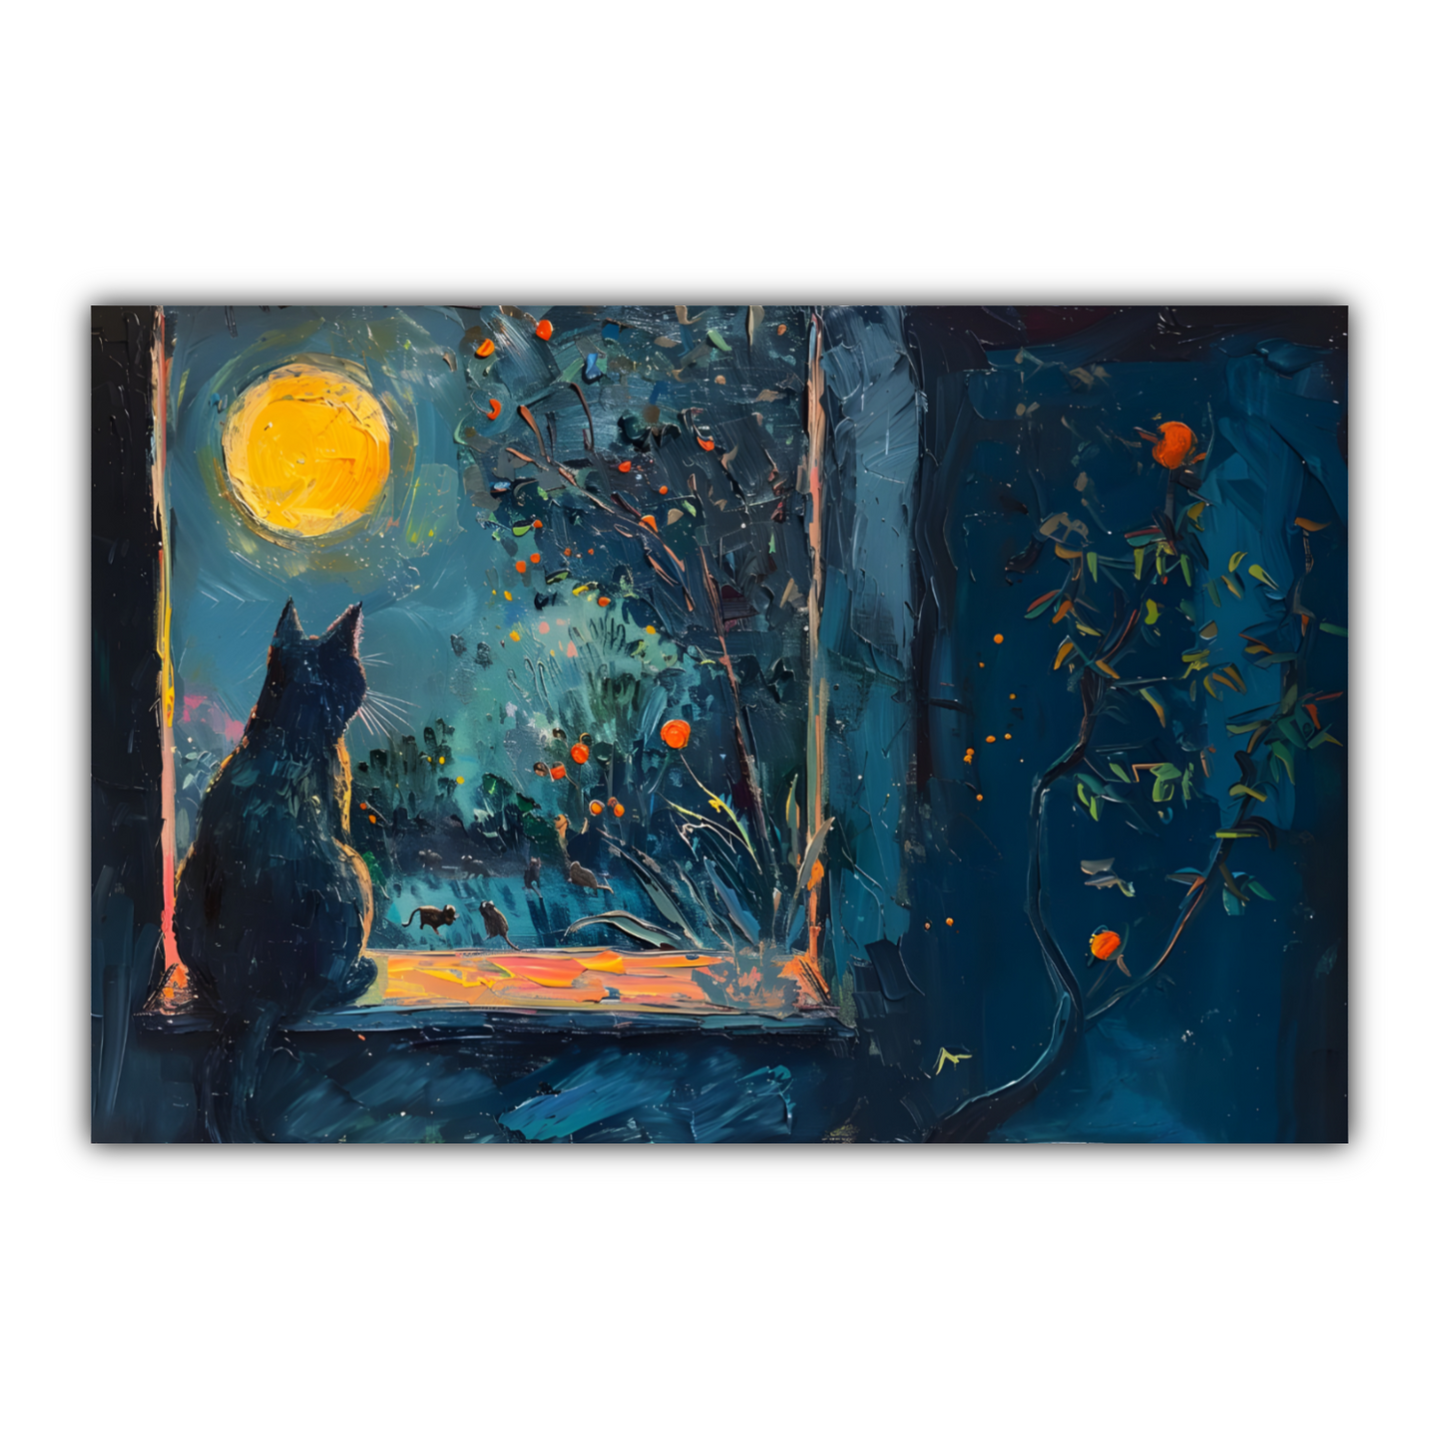 Window to the Wild  Deluxe Box Landscape Canvas Prints